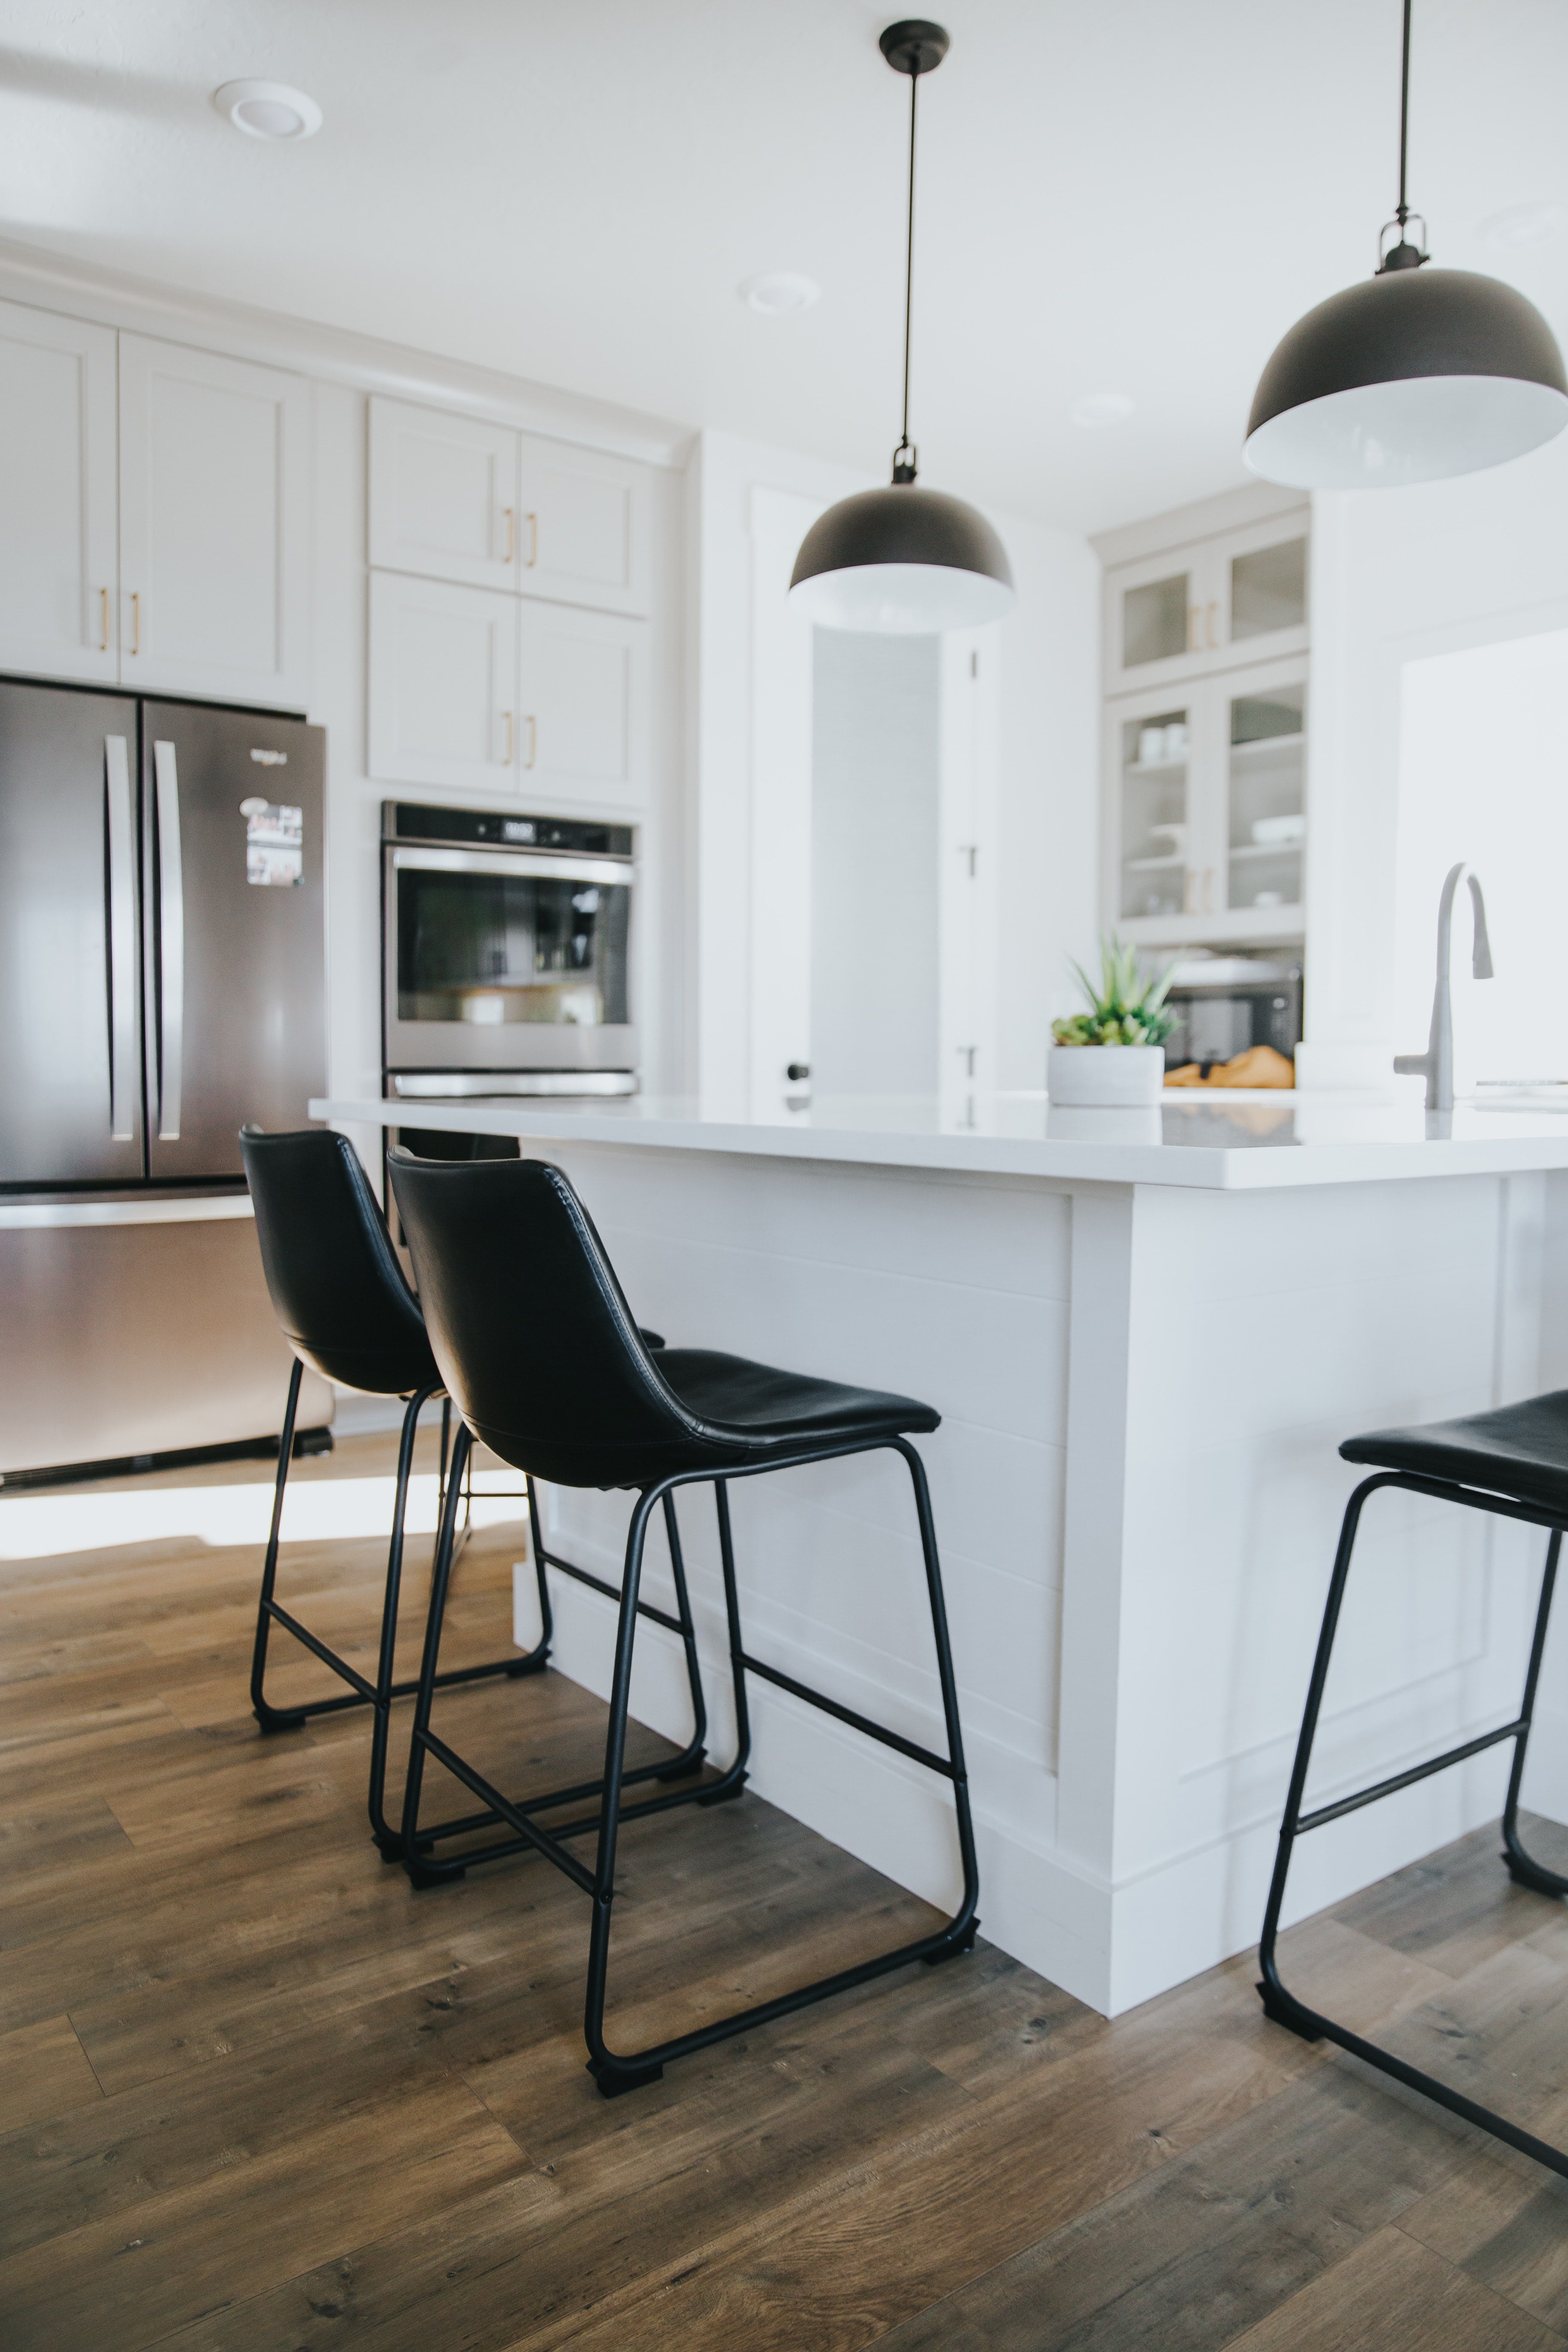 When deciding on countertops, durability, price, appearance and eco-friendliness are some of the factors you should consider before your purchase